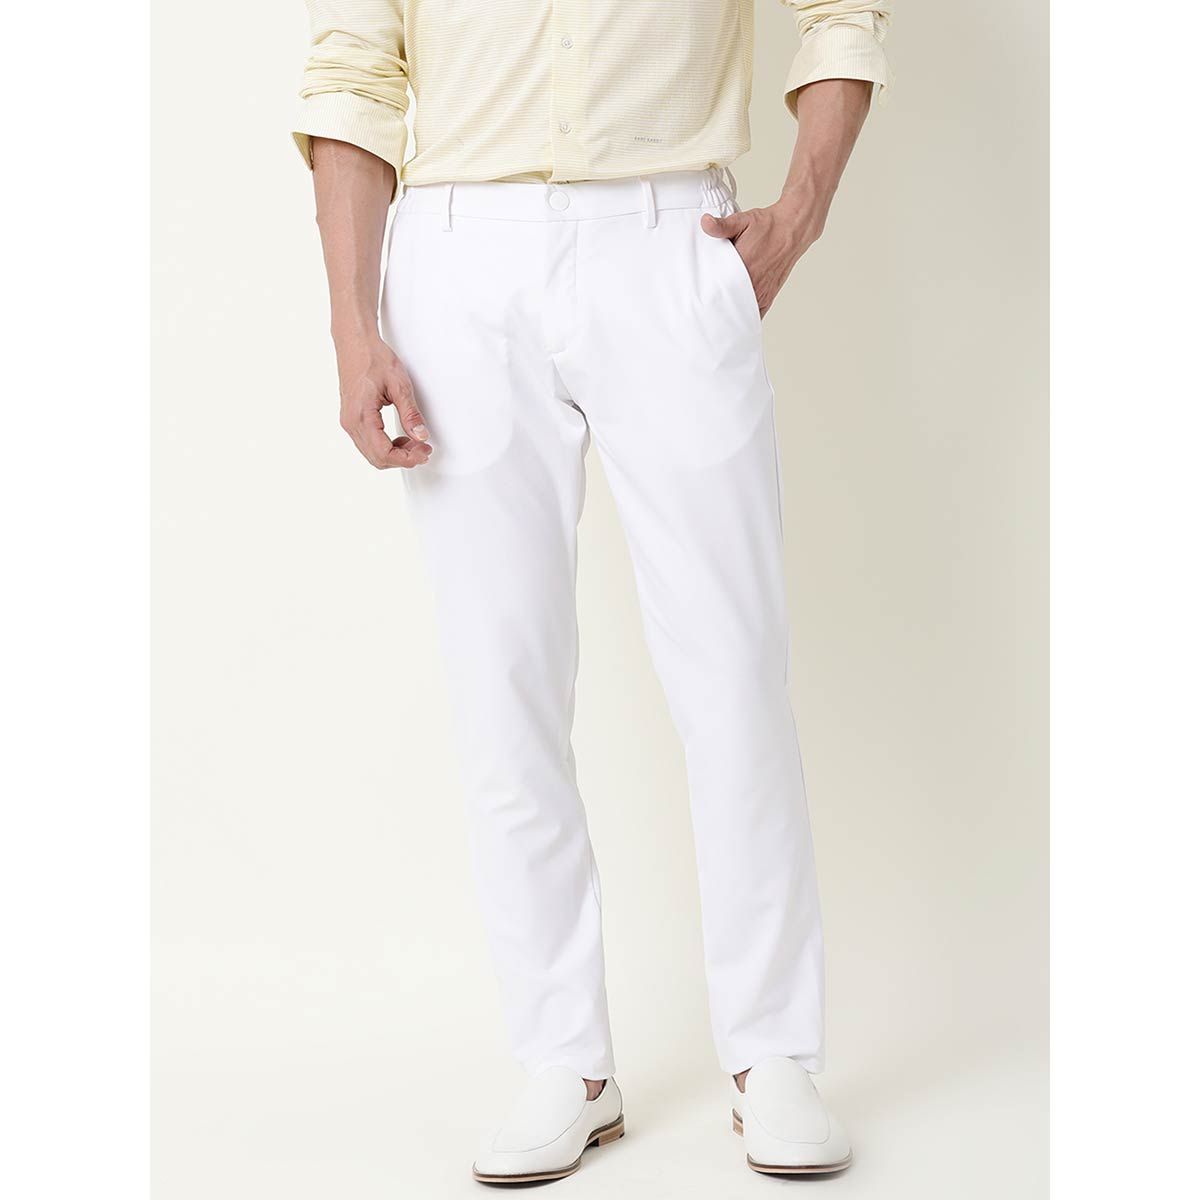 Buy Online Women White Trousers at best price  Plussin